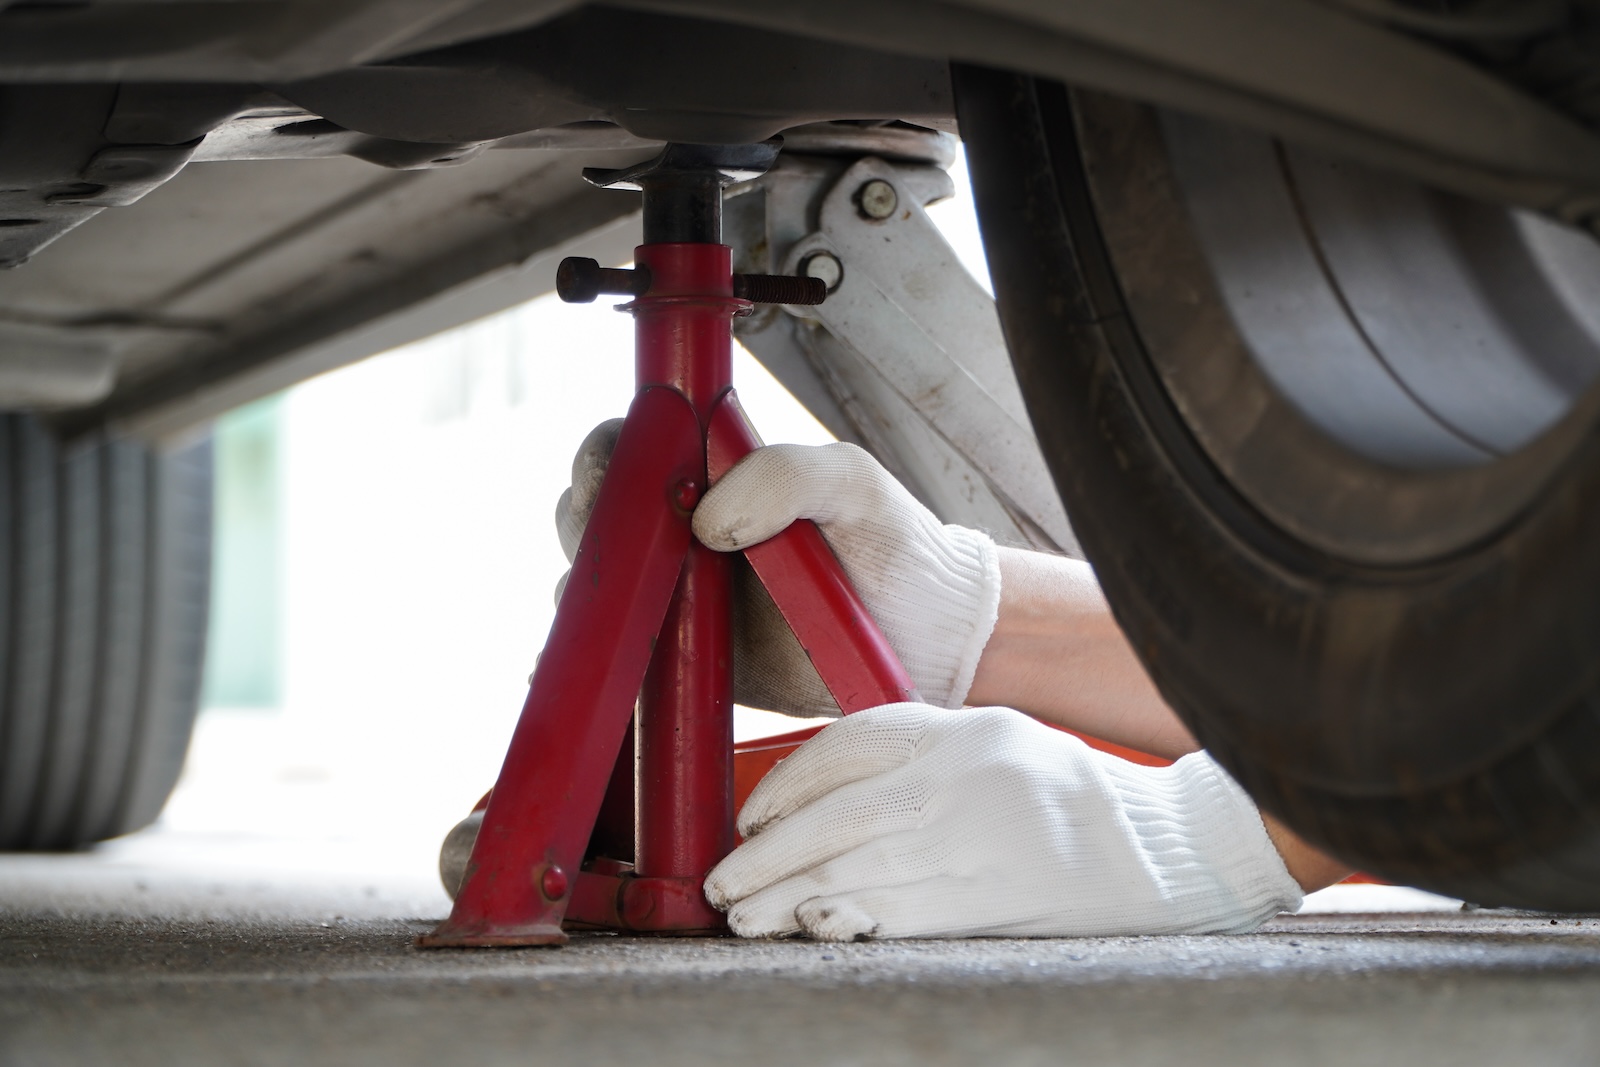 Mechanic wearing white gloves placing a red jack stand underneath a vehicle